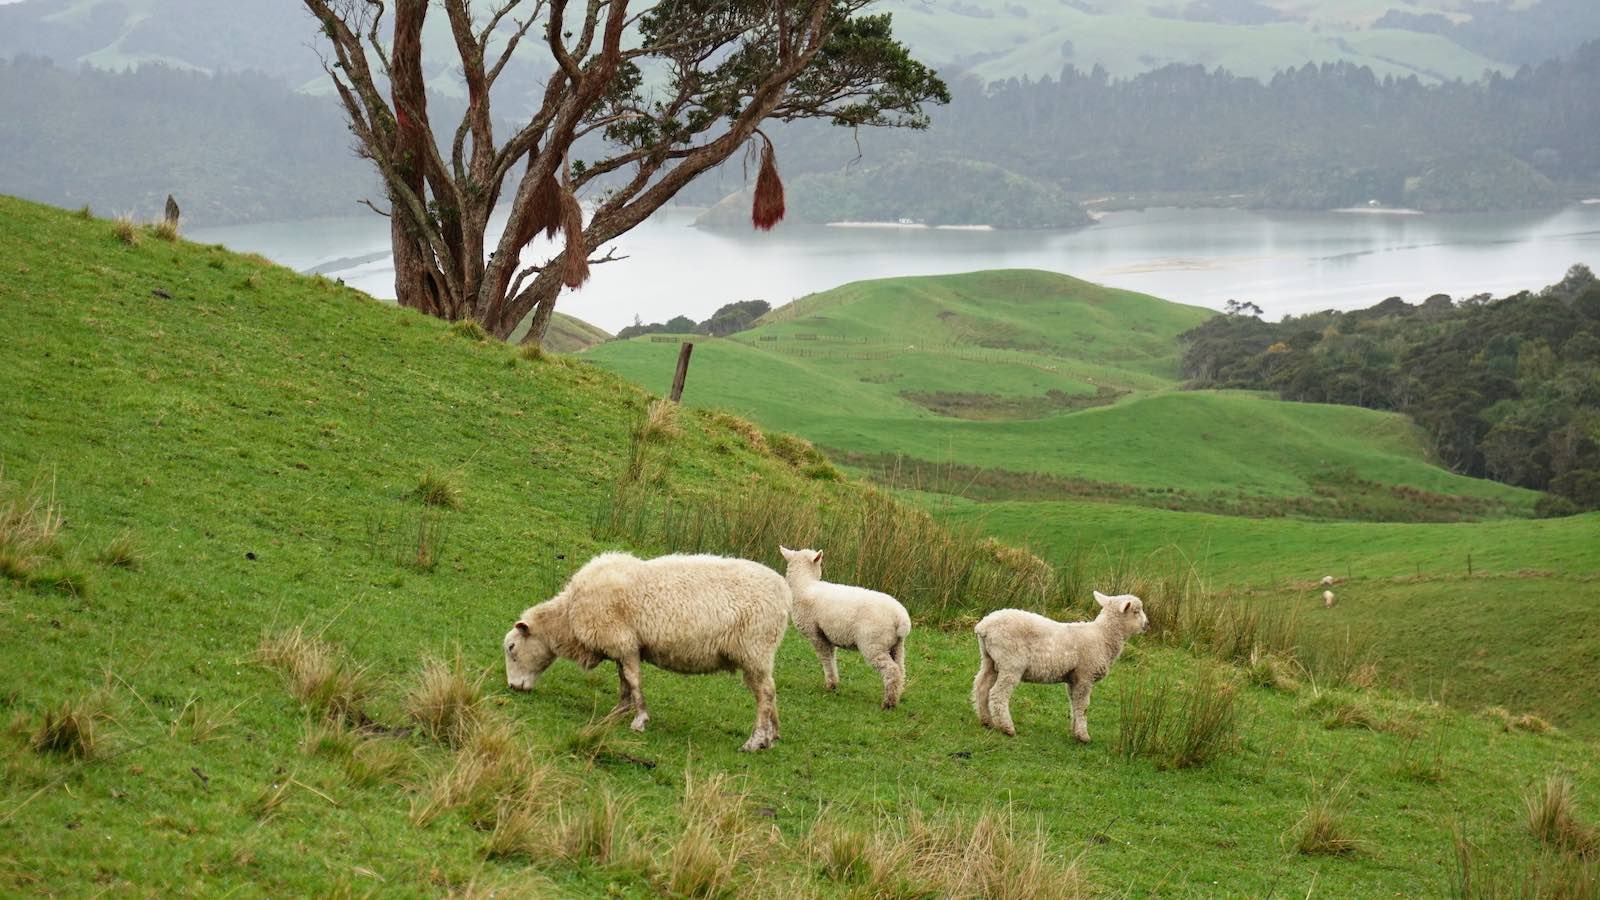 We were planning on doing a hike on Saturday but it was raining so we decided to explore some beaches and other spots on the peninsula first. We drove through rolling hills and passed a lot of sheep